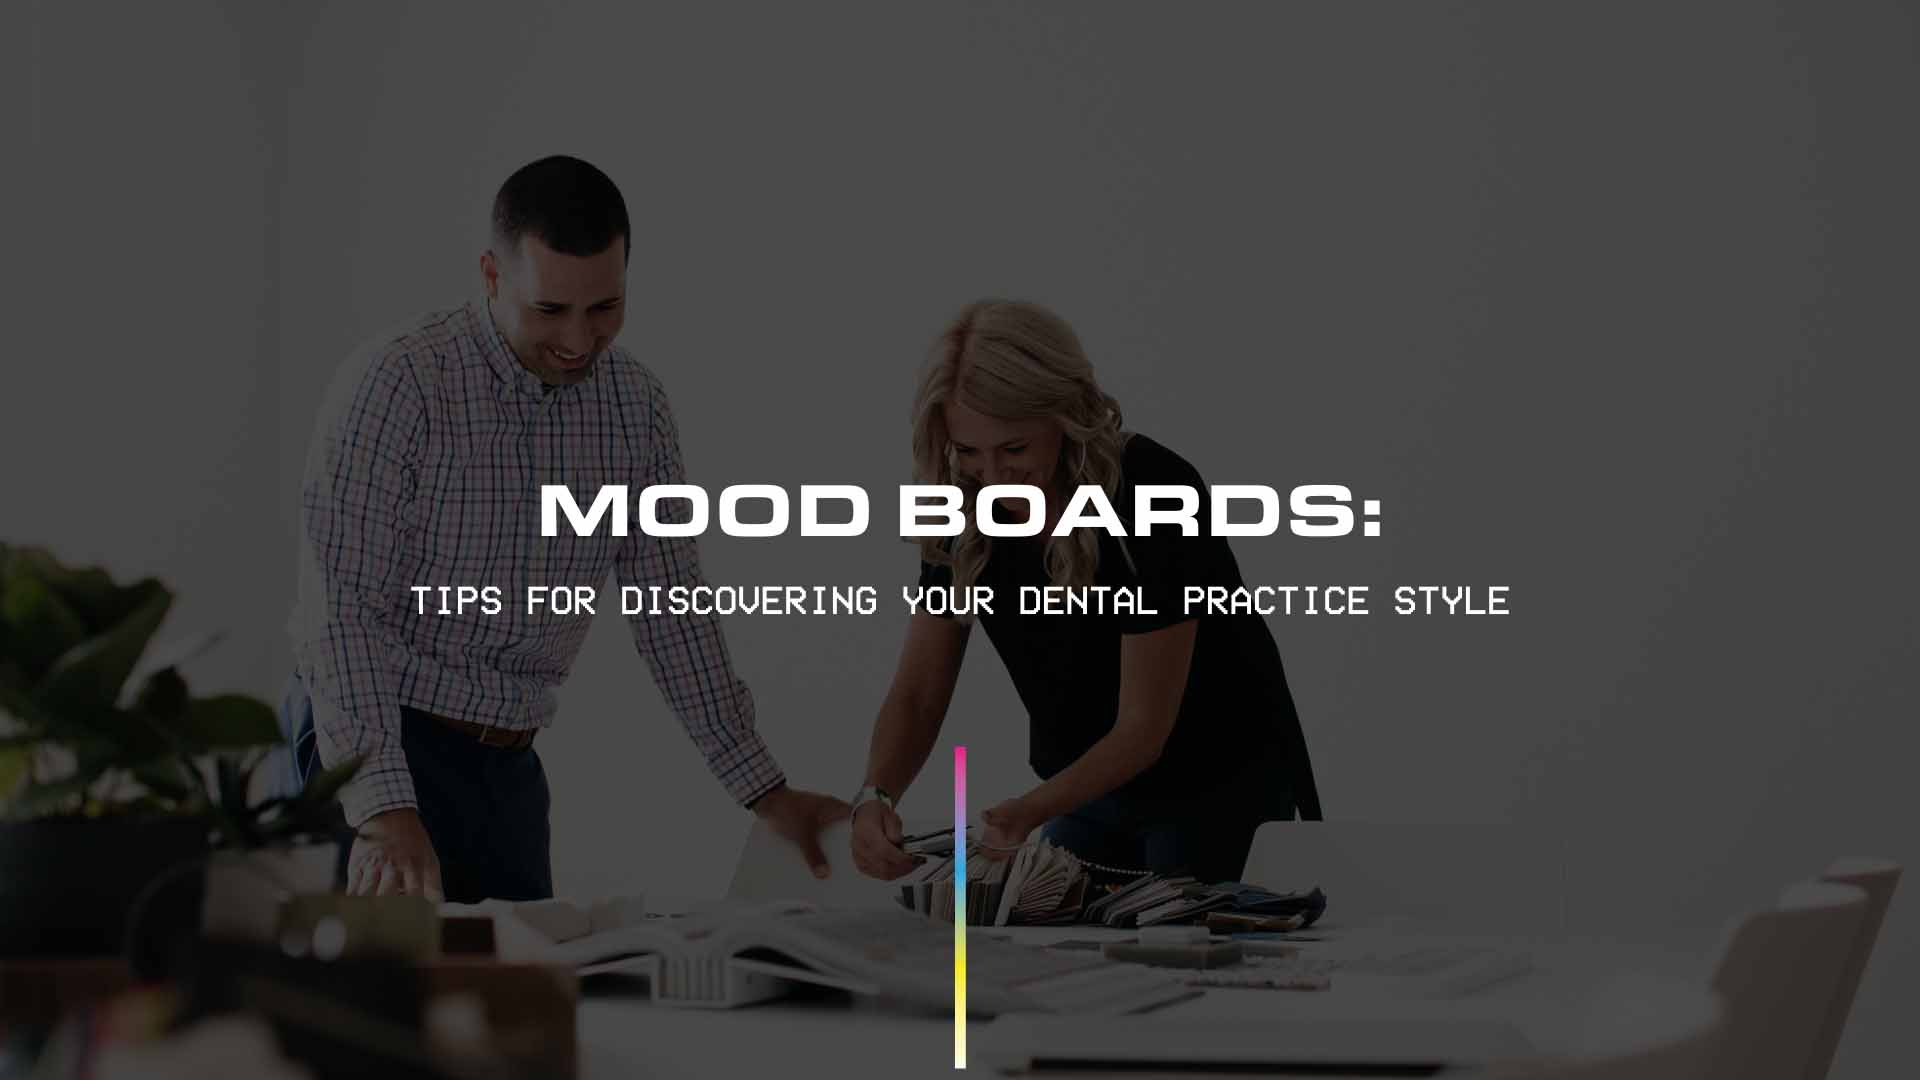 Mood Boards: Tips for Discovering Your Dental Practice Style